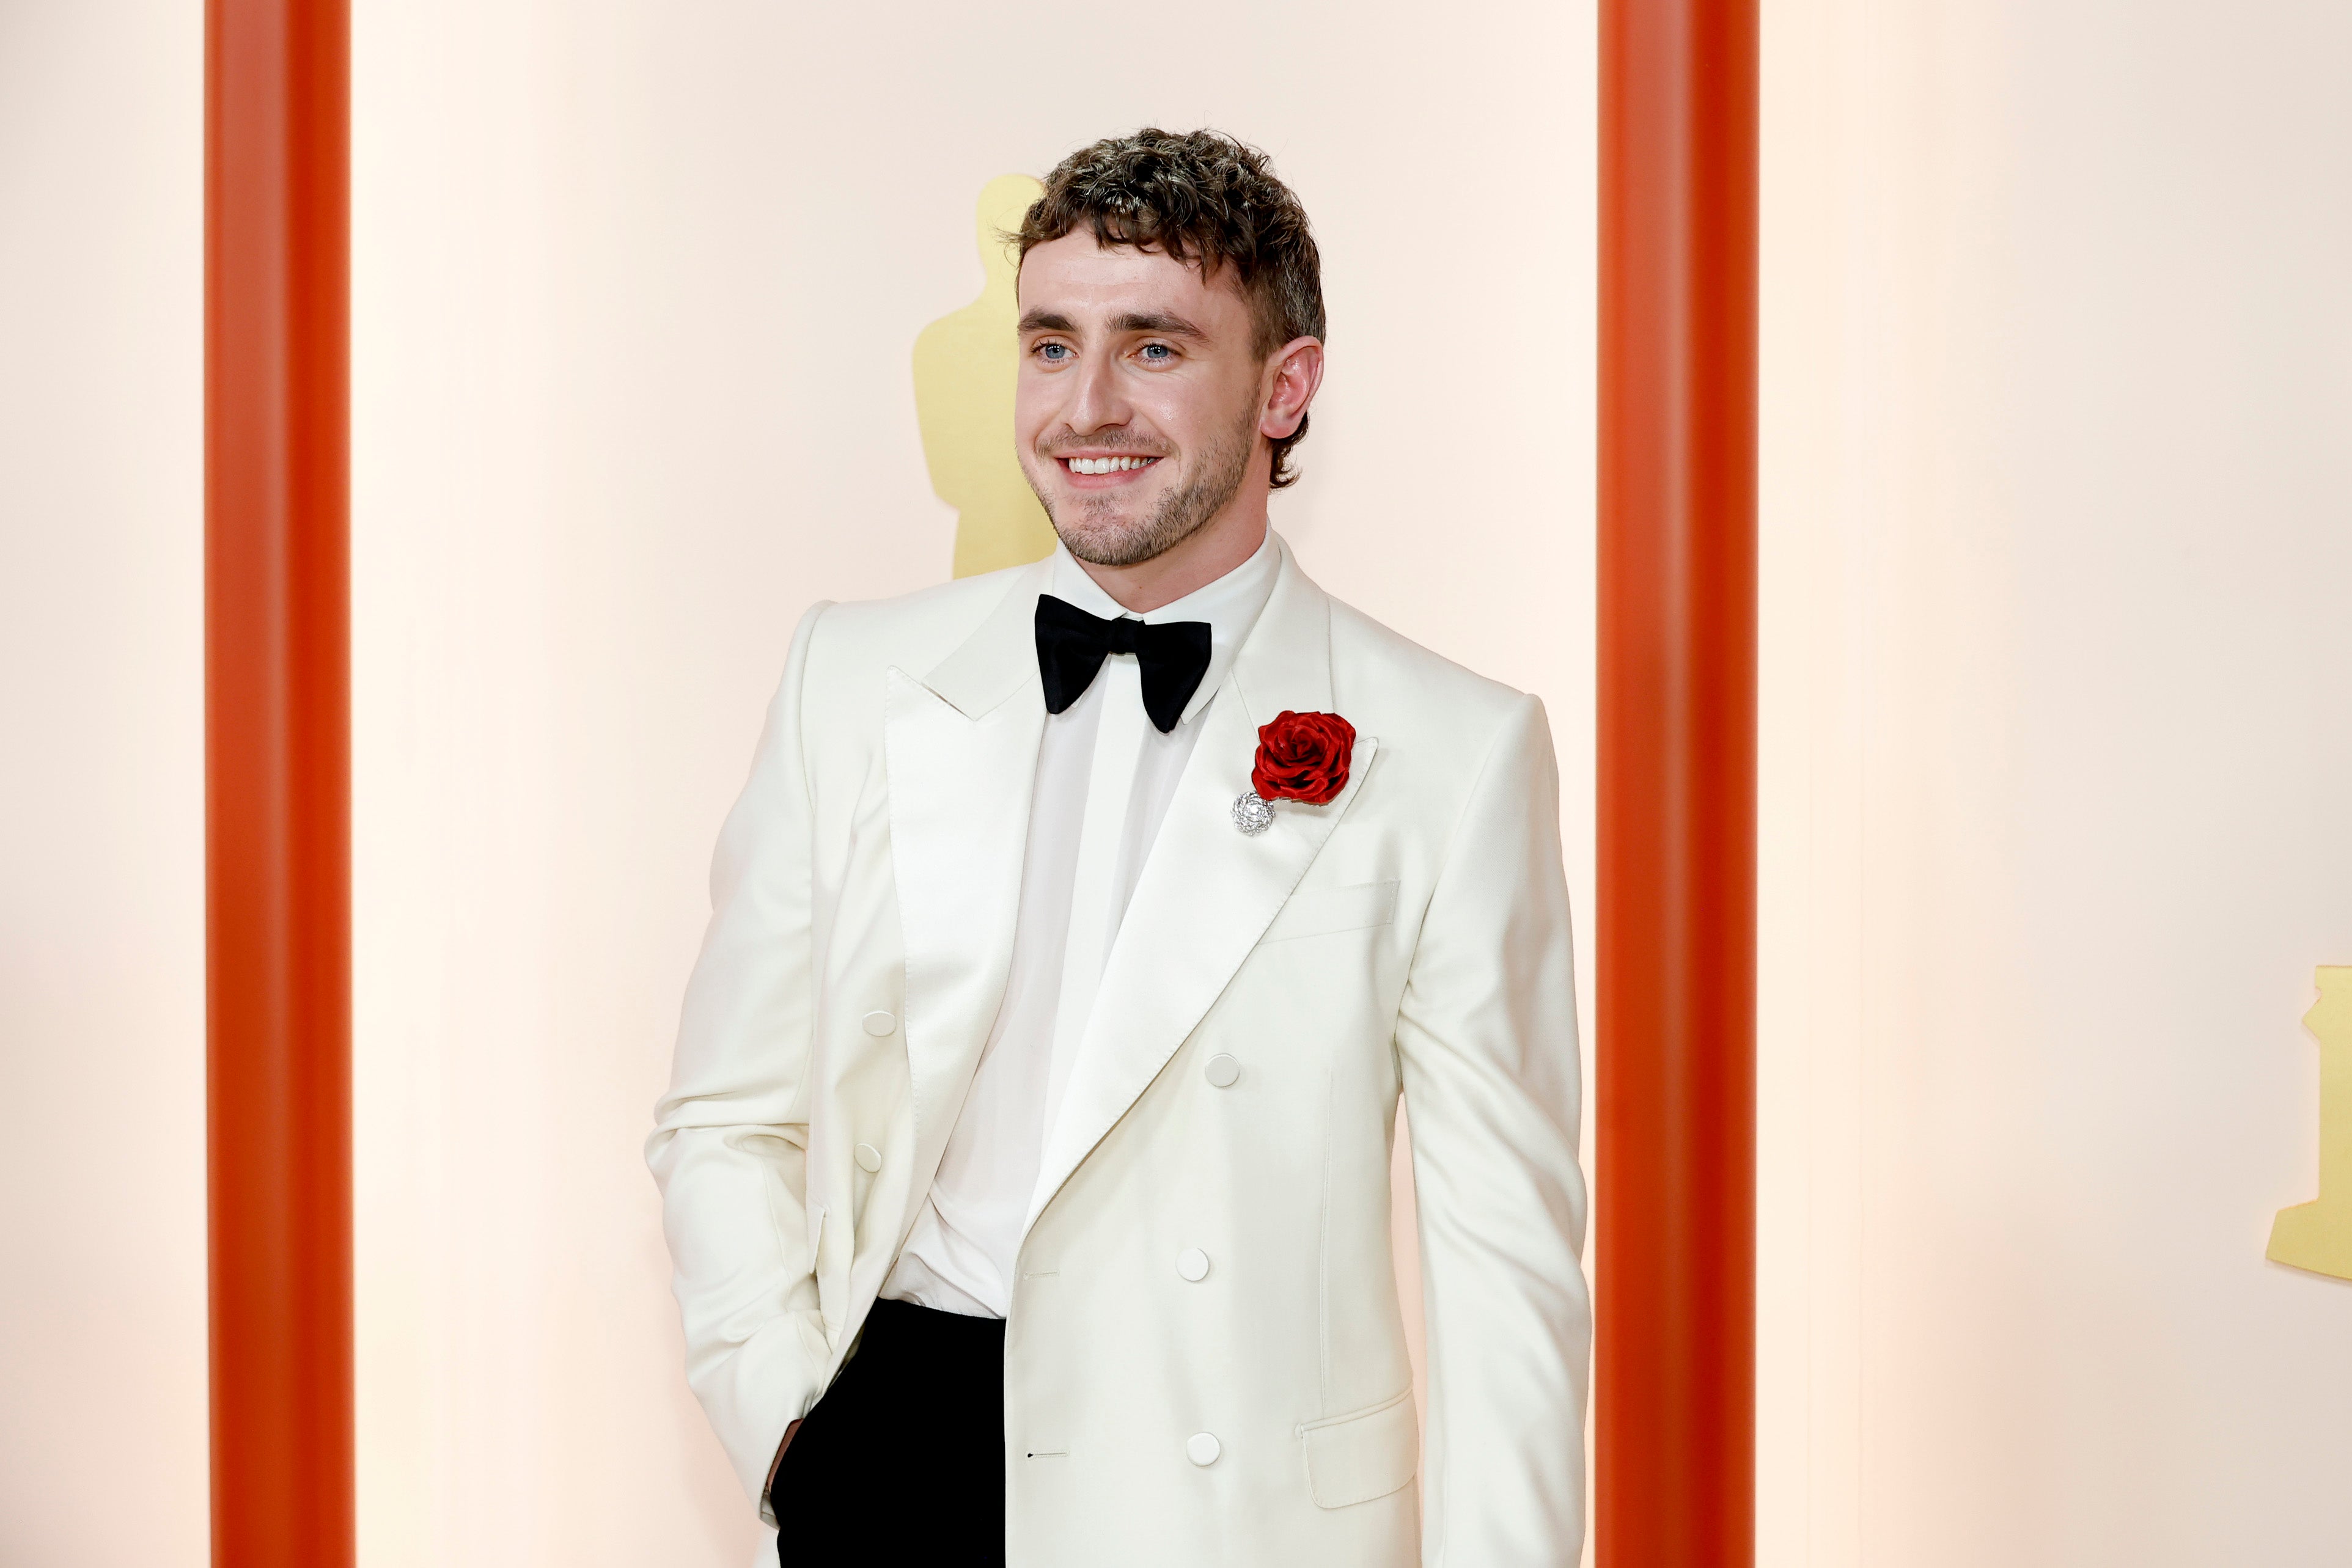 Paul Mescal at the Oscars in 2023